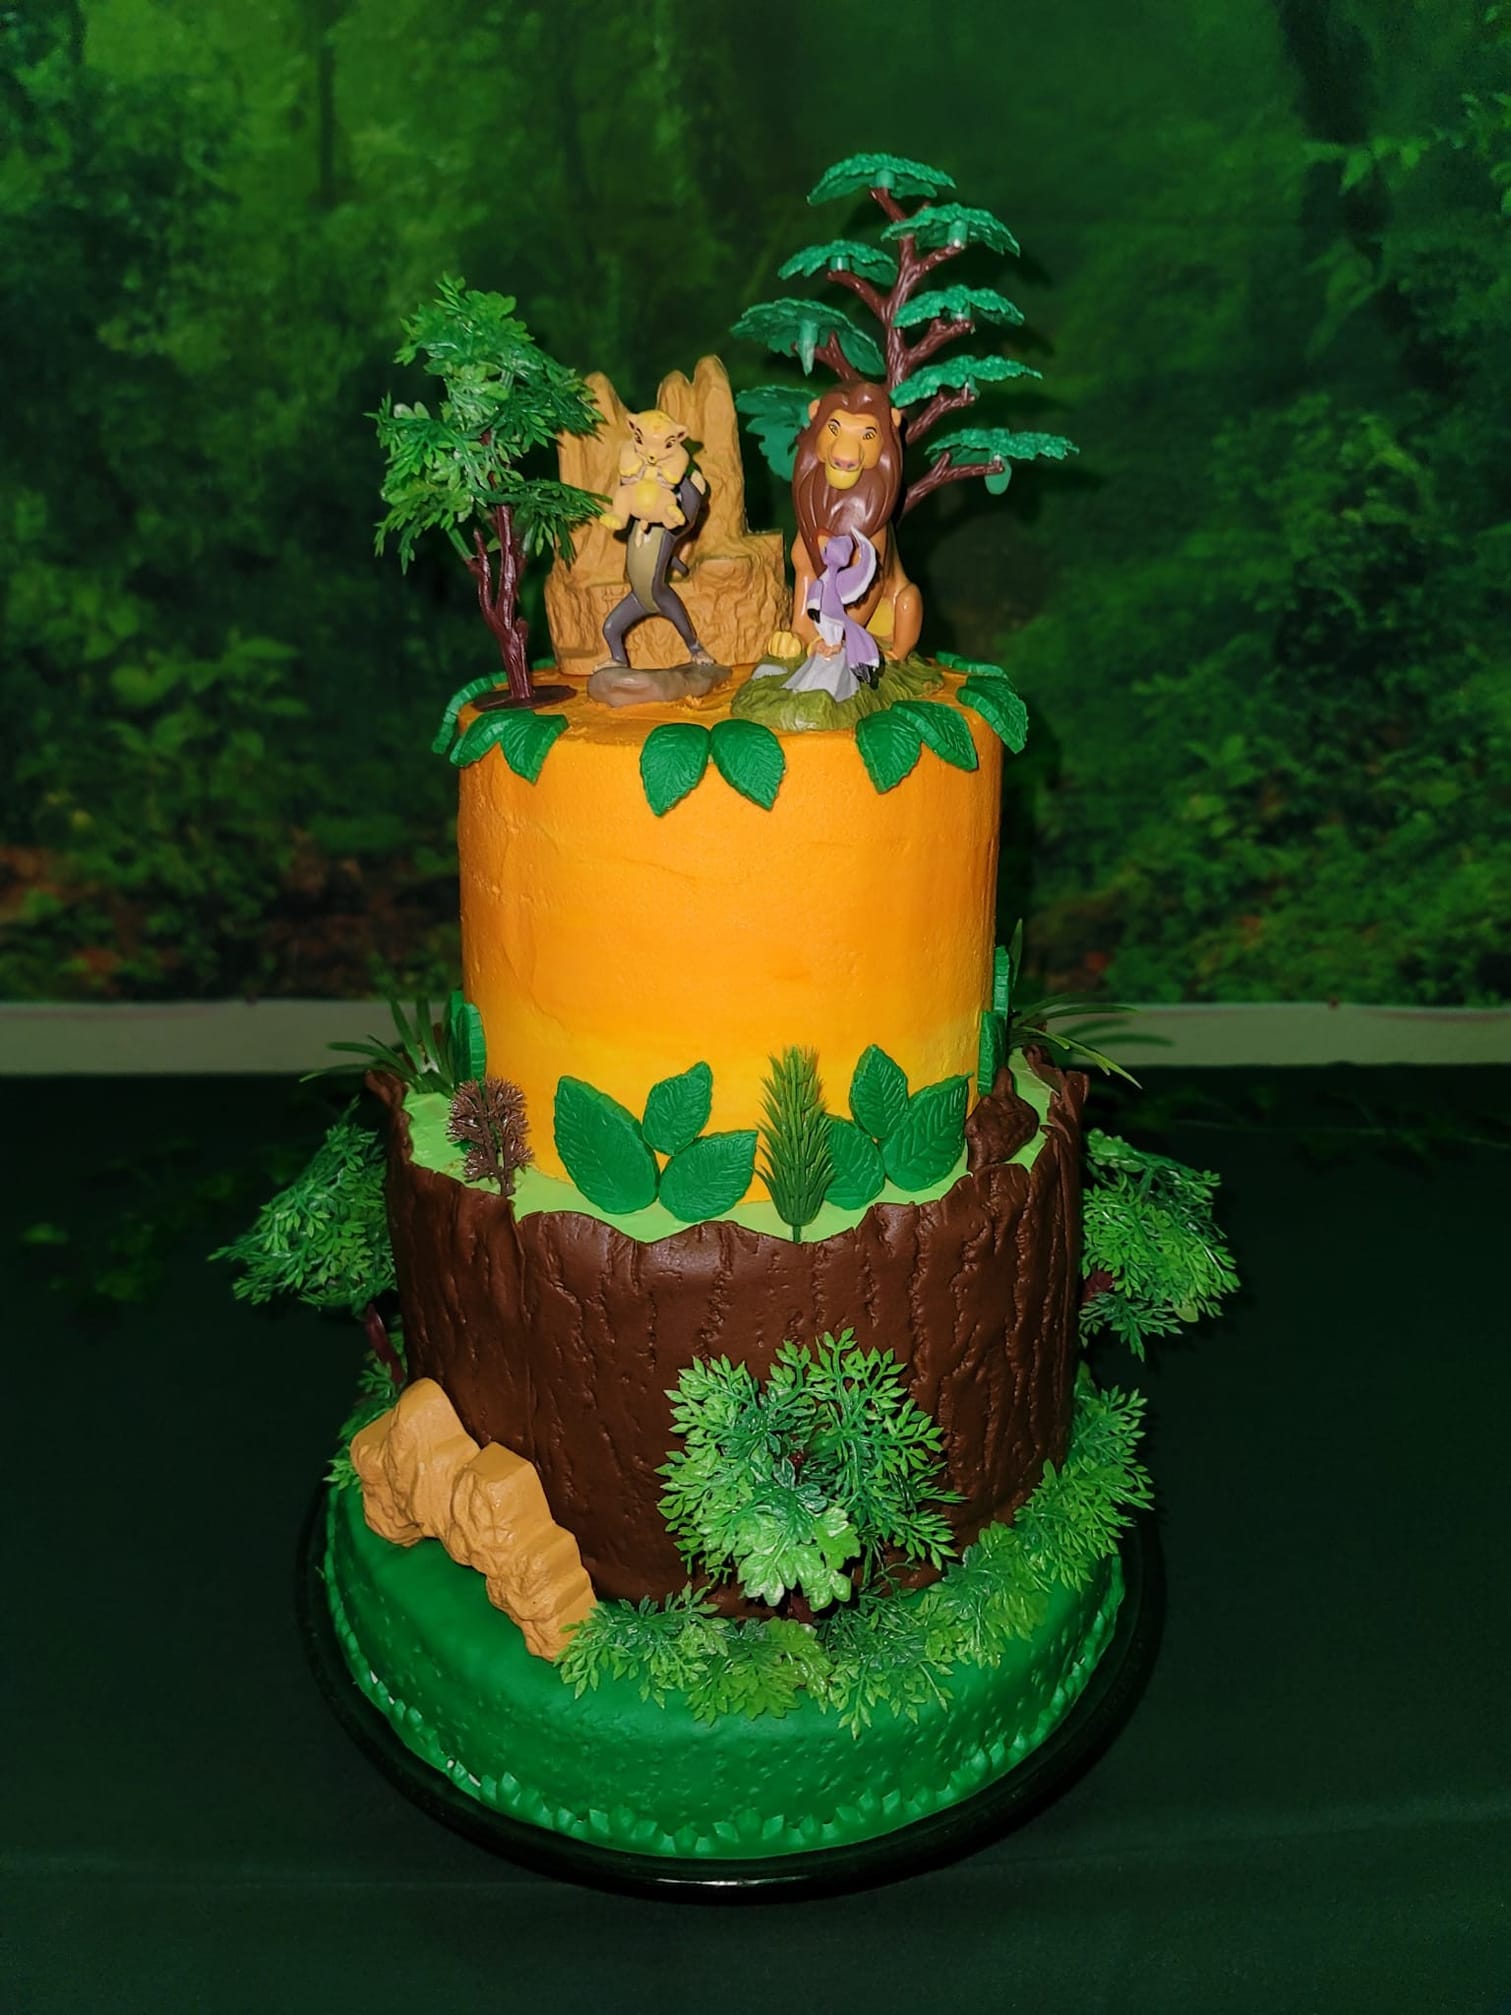 Cake by Singletary Sweets